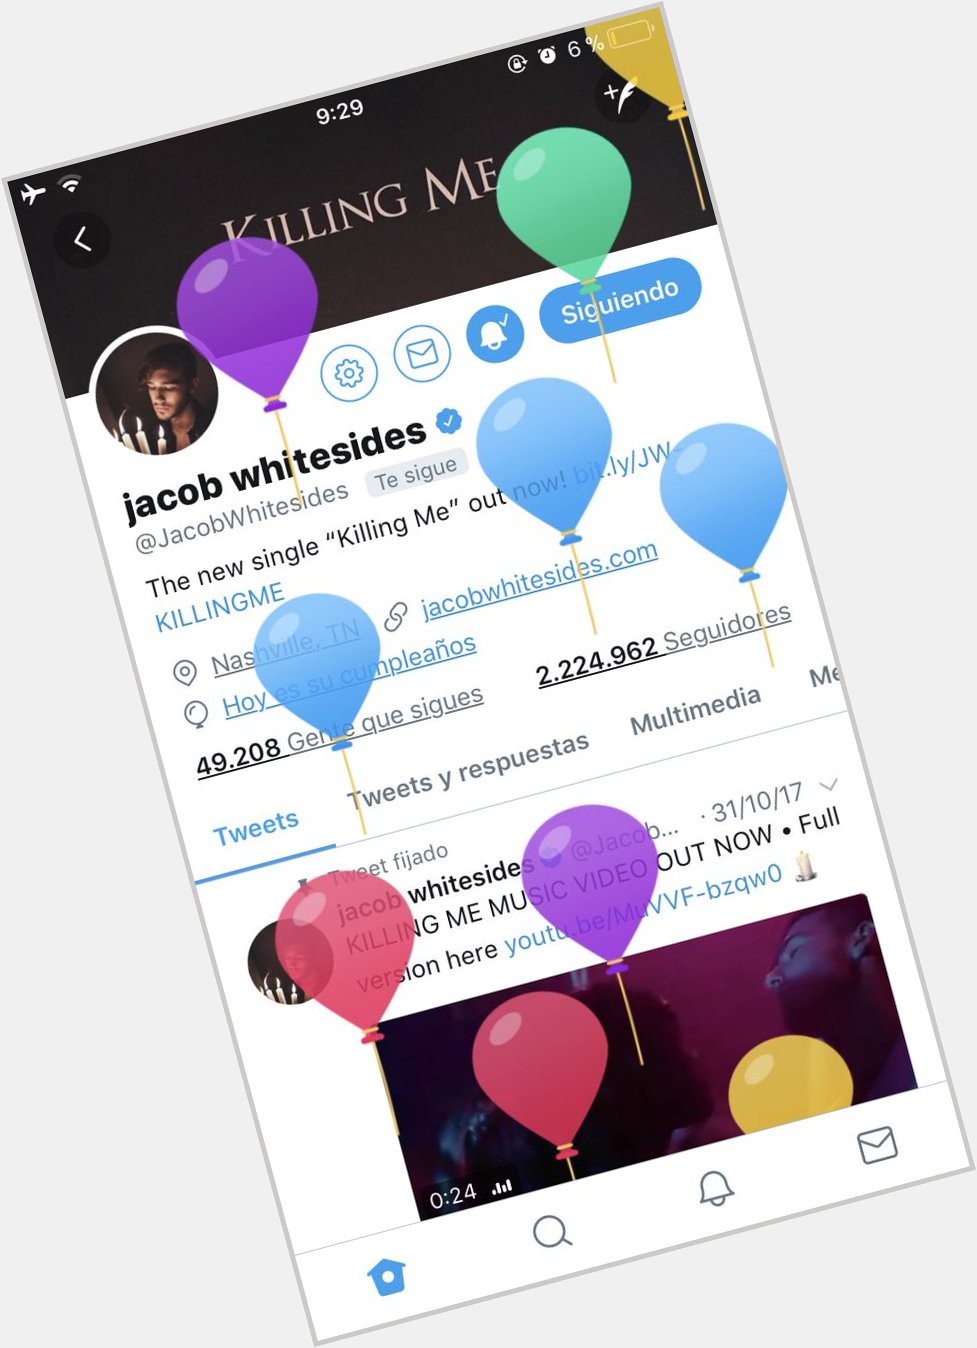 I LOVE THE BALLONS  happy birthday to the greatest artist, producer, songwriter and human being jacob whitesides 